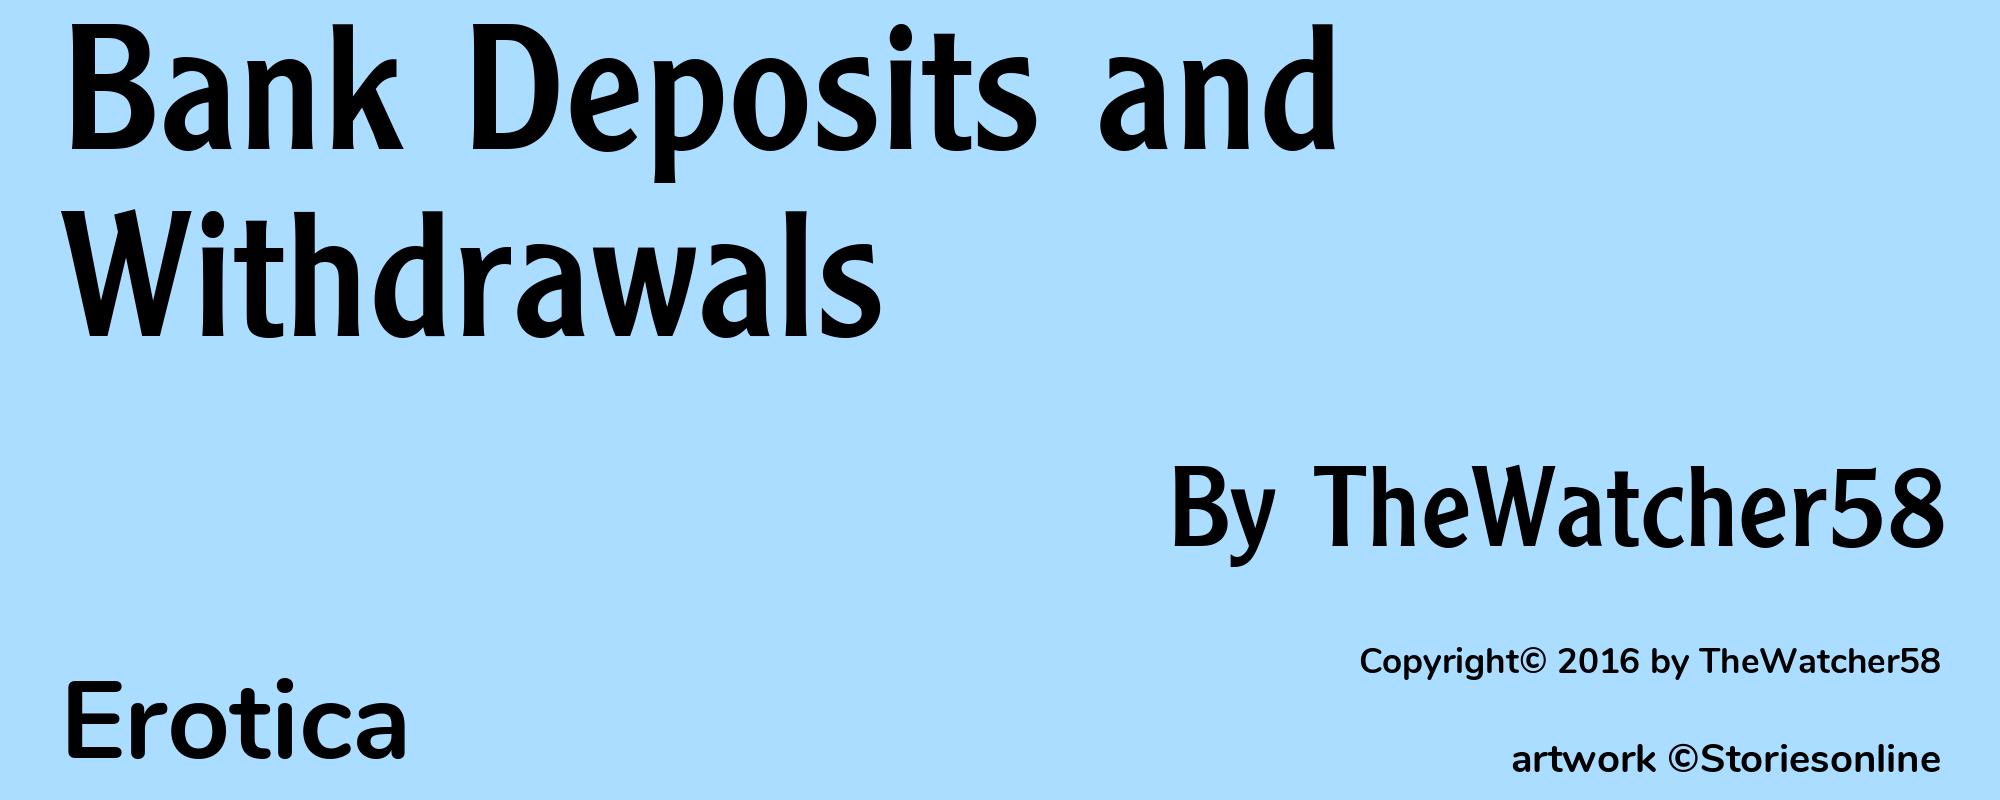 Bank Deposits and Withdrawals - Cover